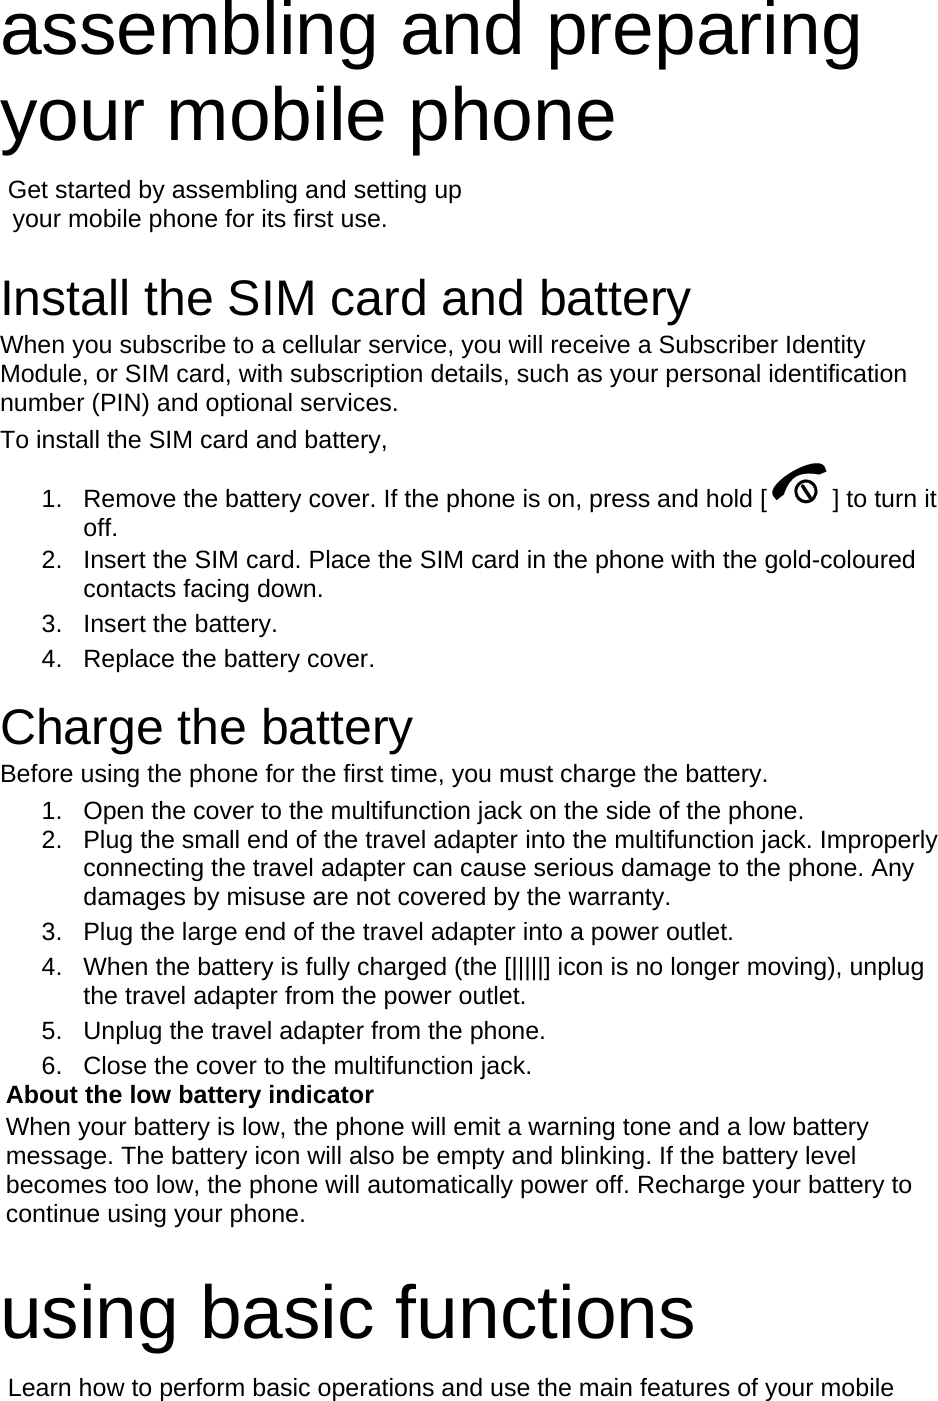 assembling and preparing your mobile phone    Get started by assembling and setting up     your mobile phone for its first use.  Install the SIM card and battery When you subscribe to a cellular service, you will receive a Subscriber Identity Module, or SIM card, with subscription details, such as your personal identification number (PIN) and optional services. To install the SIM card and battery, 1.  Remove the battery cover. If the phone is on, press and hold [ ] to turn it off. 2.  Insert the SIM card. Place the SIM card in the phone with the gold-coloured contacts facing down. 3. Insert the battery. 4.  Replace the battery cover.  Charge the battery Before using the phone for the first time, you must charge the battery. 1.  Open the cover to the multifunction jack on the side of the phone. 2.  Plug the small end of the travel adapter into the multifunction jack. Improperly connecting the travel adapter can cause serious damage to the phone. Any damages by misuse are not covered by the warranty. 3.  Plug the large end of the travel adapter into a power outlet. 4.  When the battery is fully charged (the [|||||] icon is no longer moving), unplug the travel adapter from the power outlet. 5.  Unplug the travel adapter from the phone. 6.  Close the cover to the multifunction jack. About the low battery indicator When your battery is low, the phone will emit a warning tone and a low battery message. The battery icon will also be empty and blinking. If the battery level becomes too low, the phone will automatically power off. Recharge your battery to continue using your phone.  using basic functions  Learn how to perform basic operations and use the main features of your mobile 